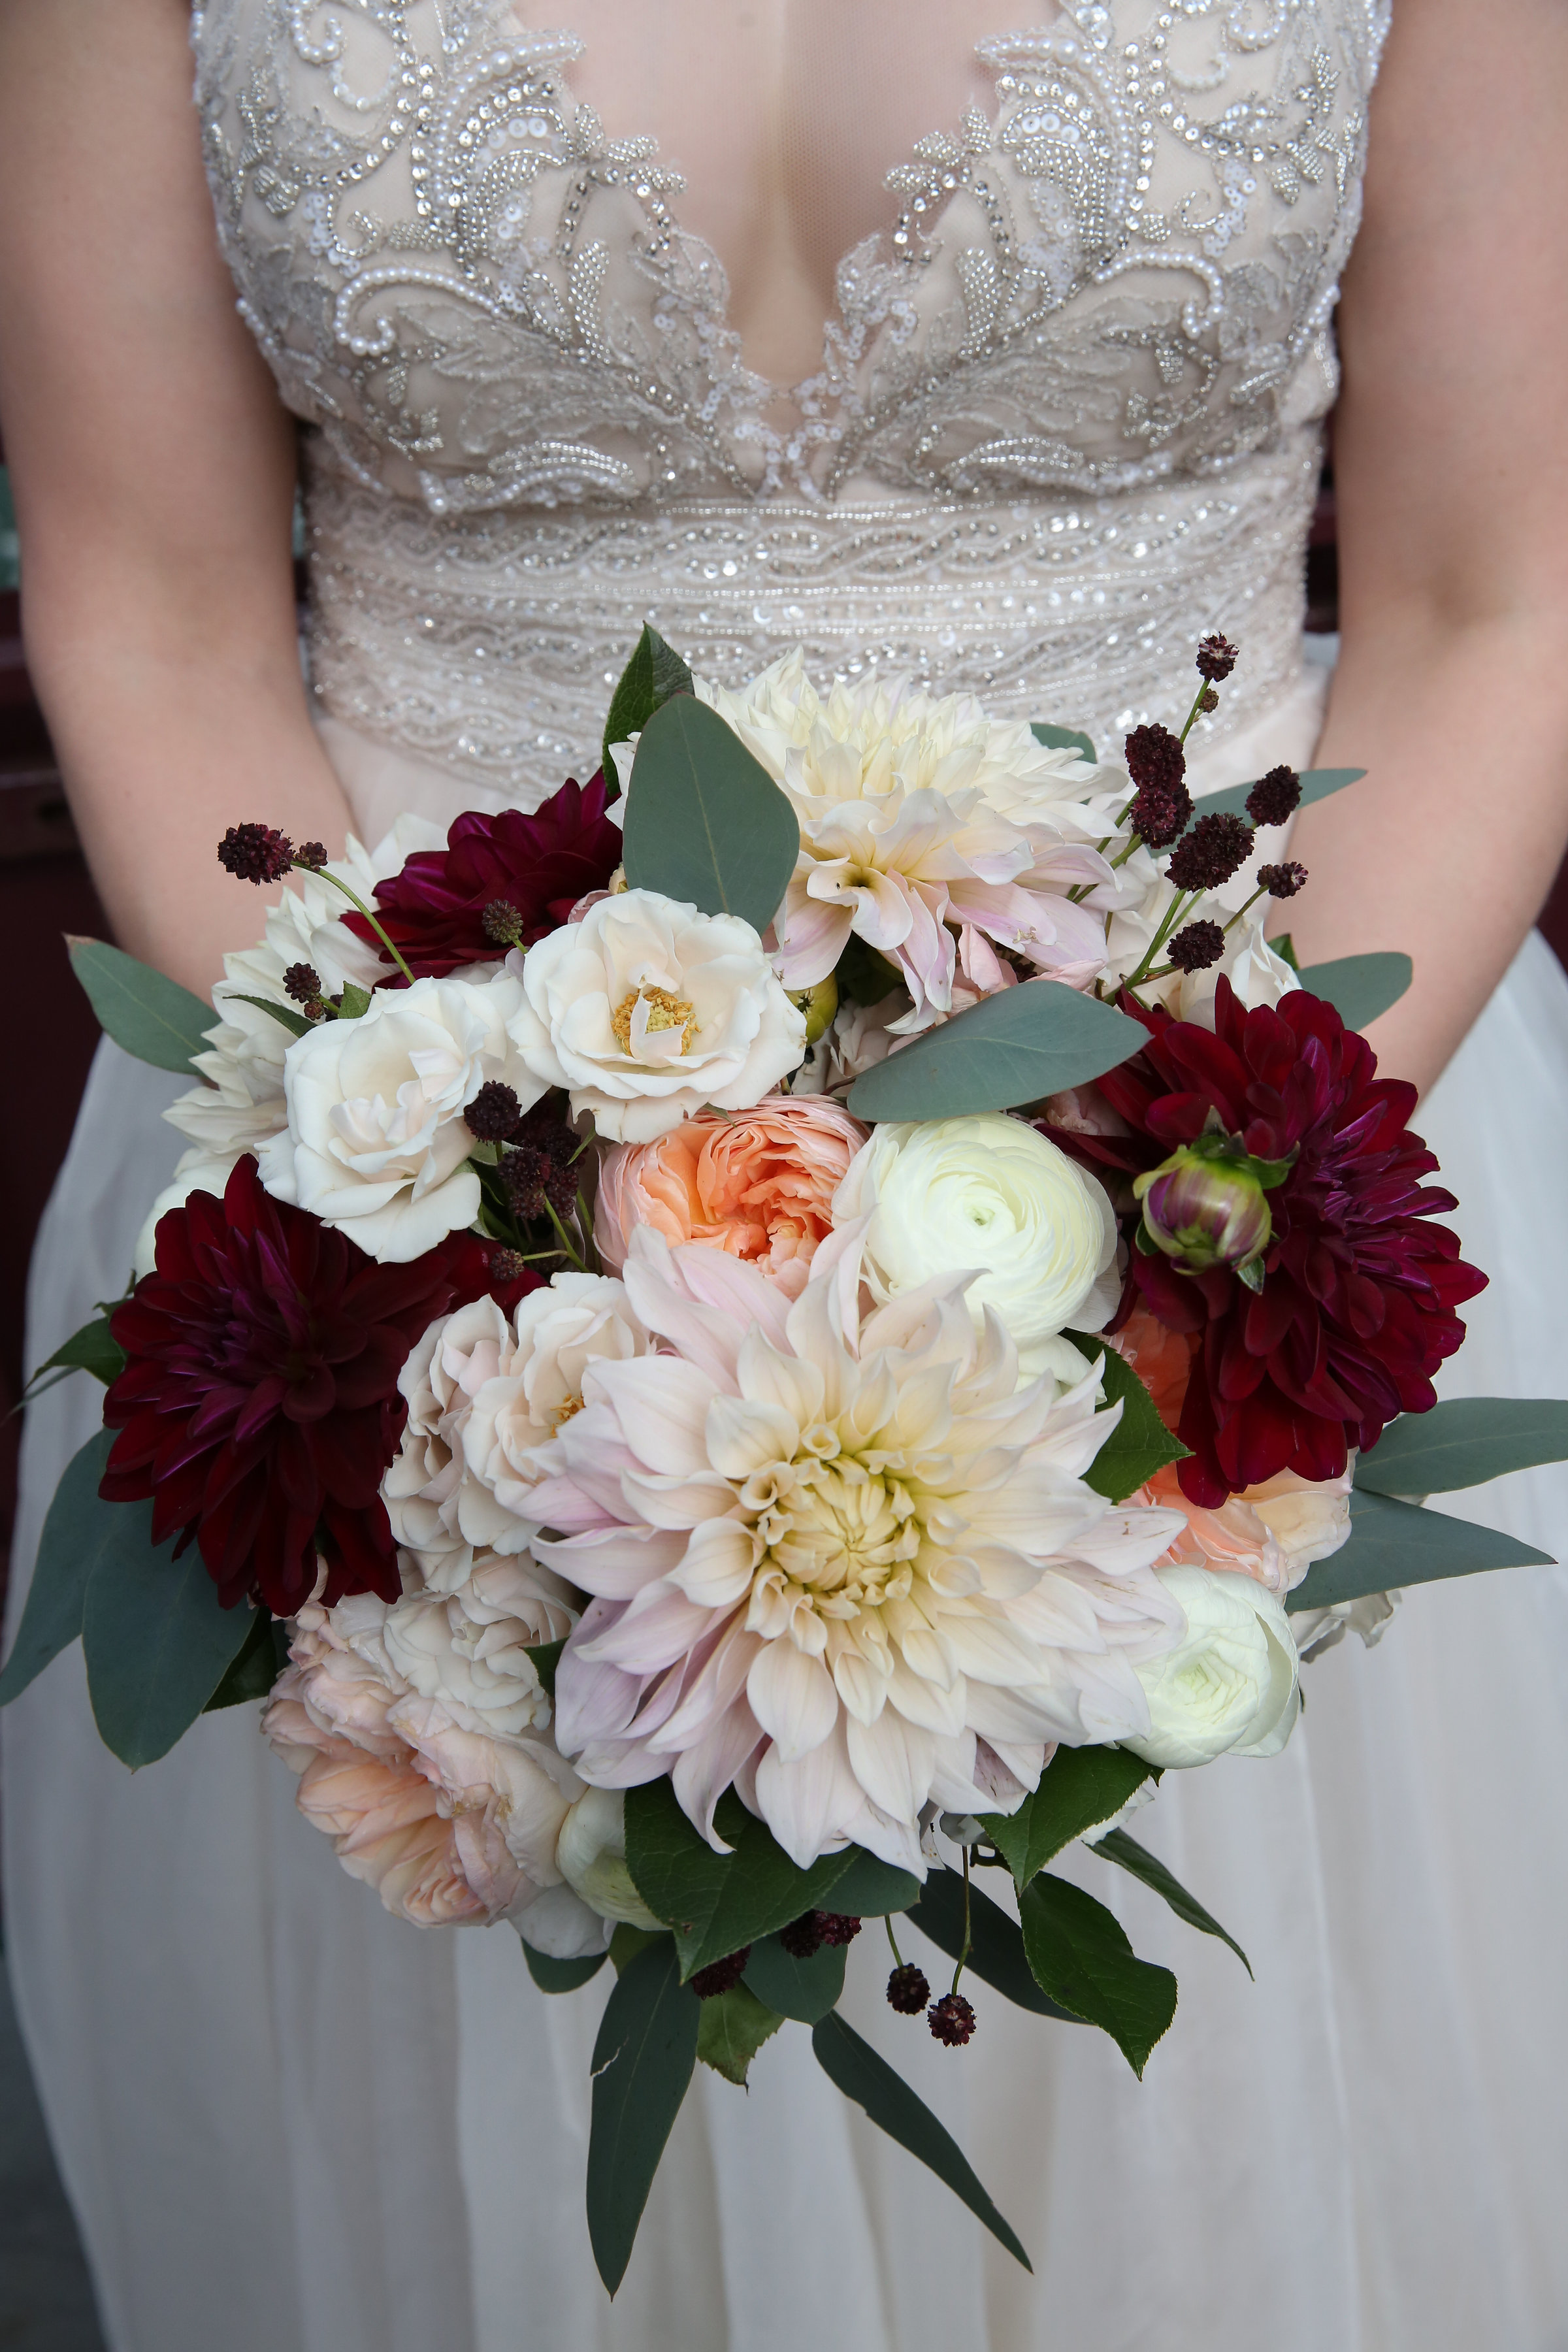 Bridal bouquet with spring flowers of burgundy and blush dahlias, garden roses, and white majolica.